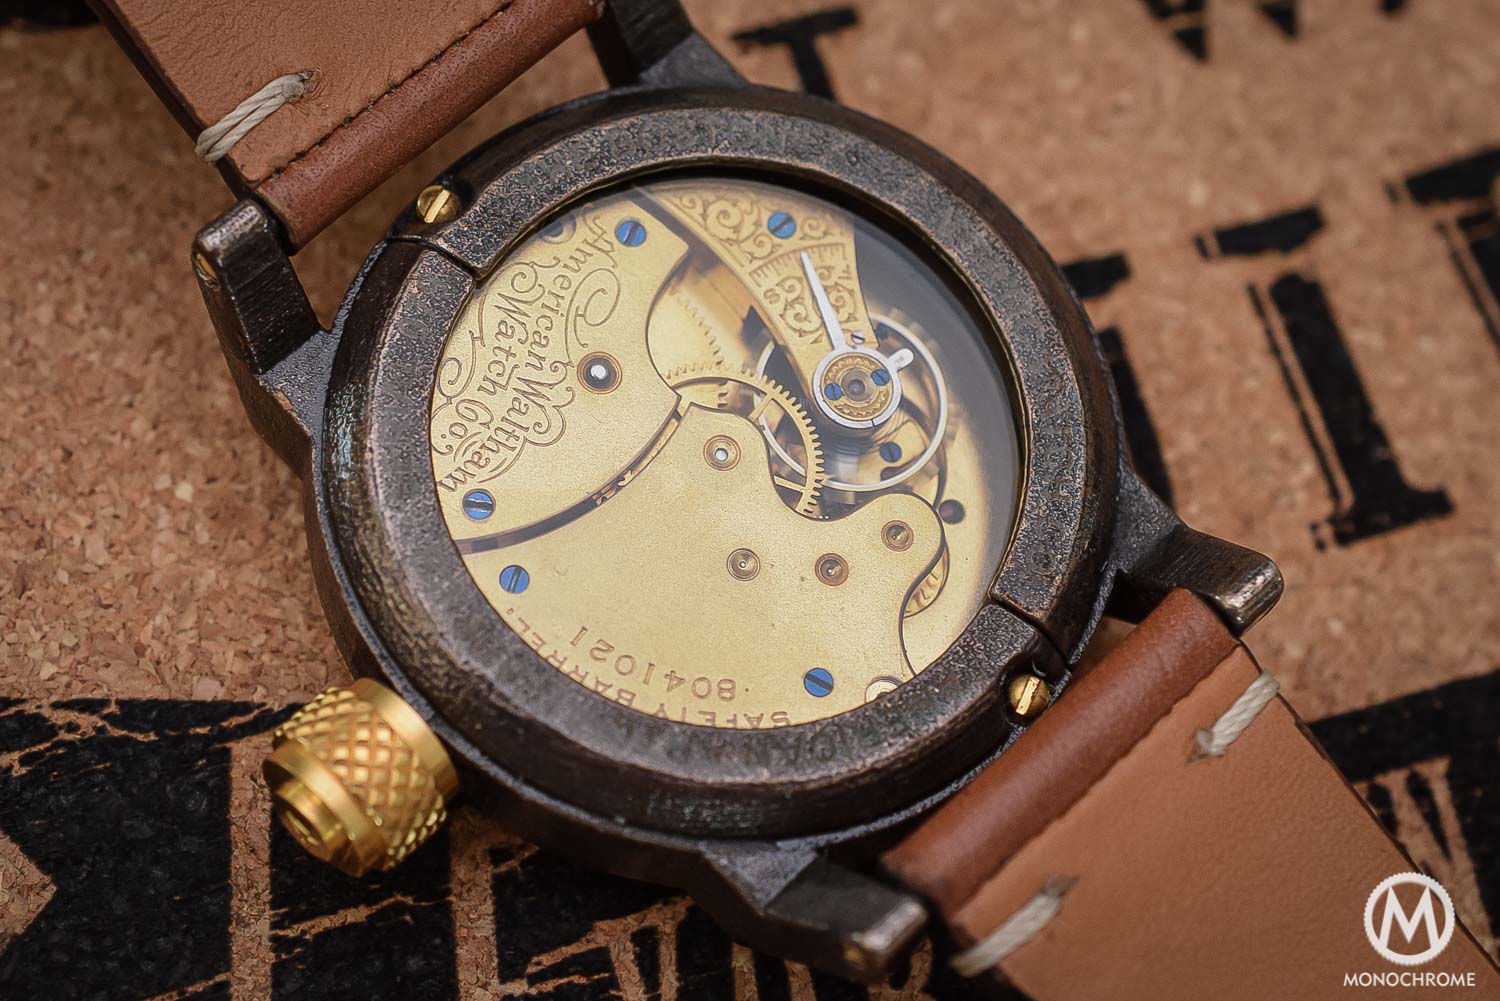 Vortic Watch Co - antique movements and 3D printed cases - 2